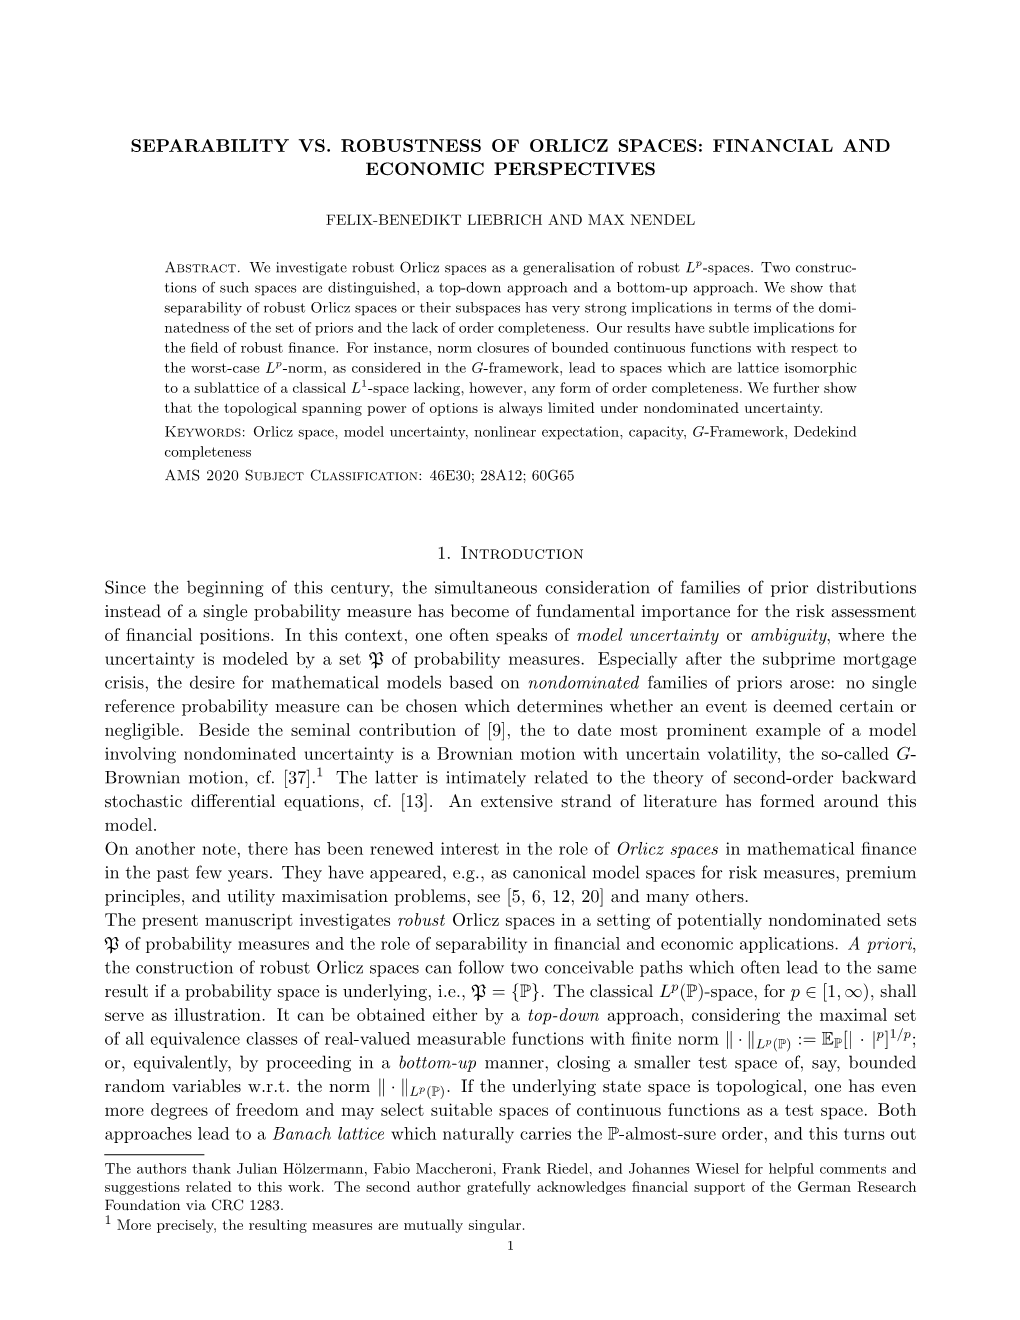 Separability Vs. Robustness of Orlicz Spaces: Financial and Economic Perspectives